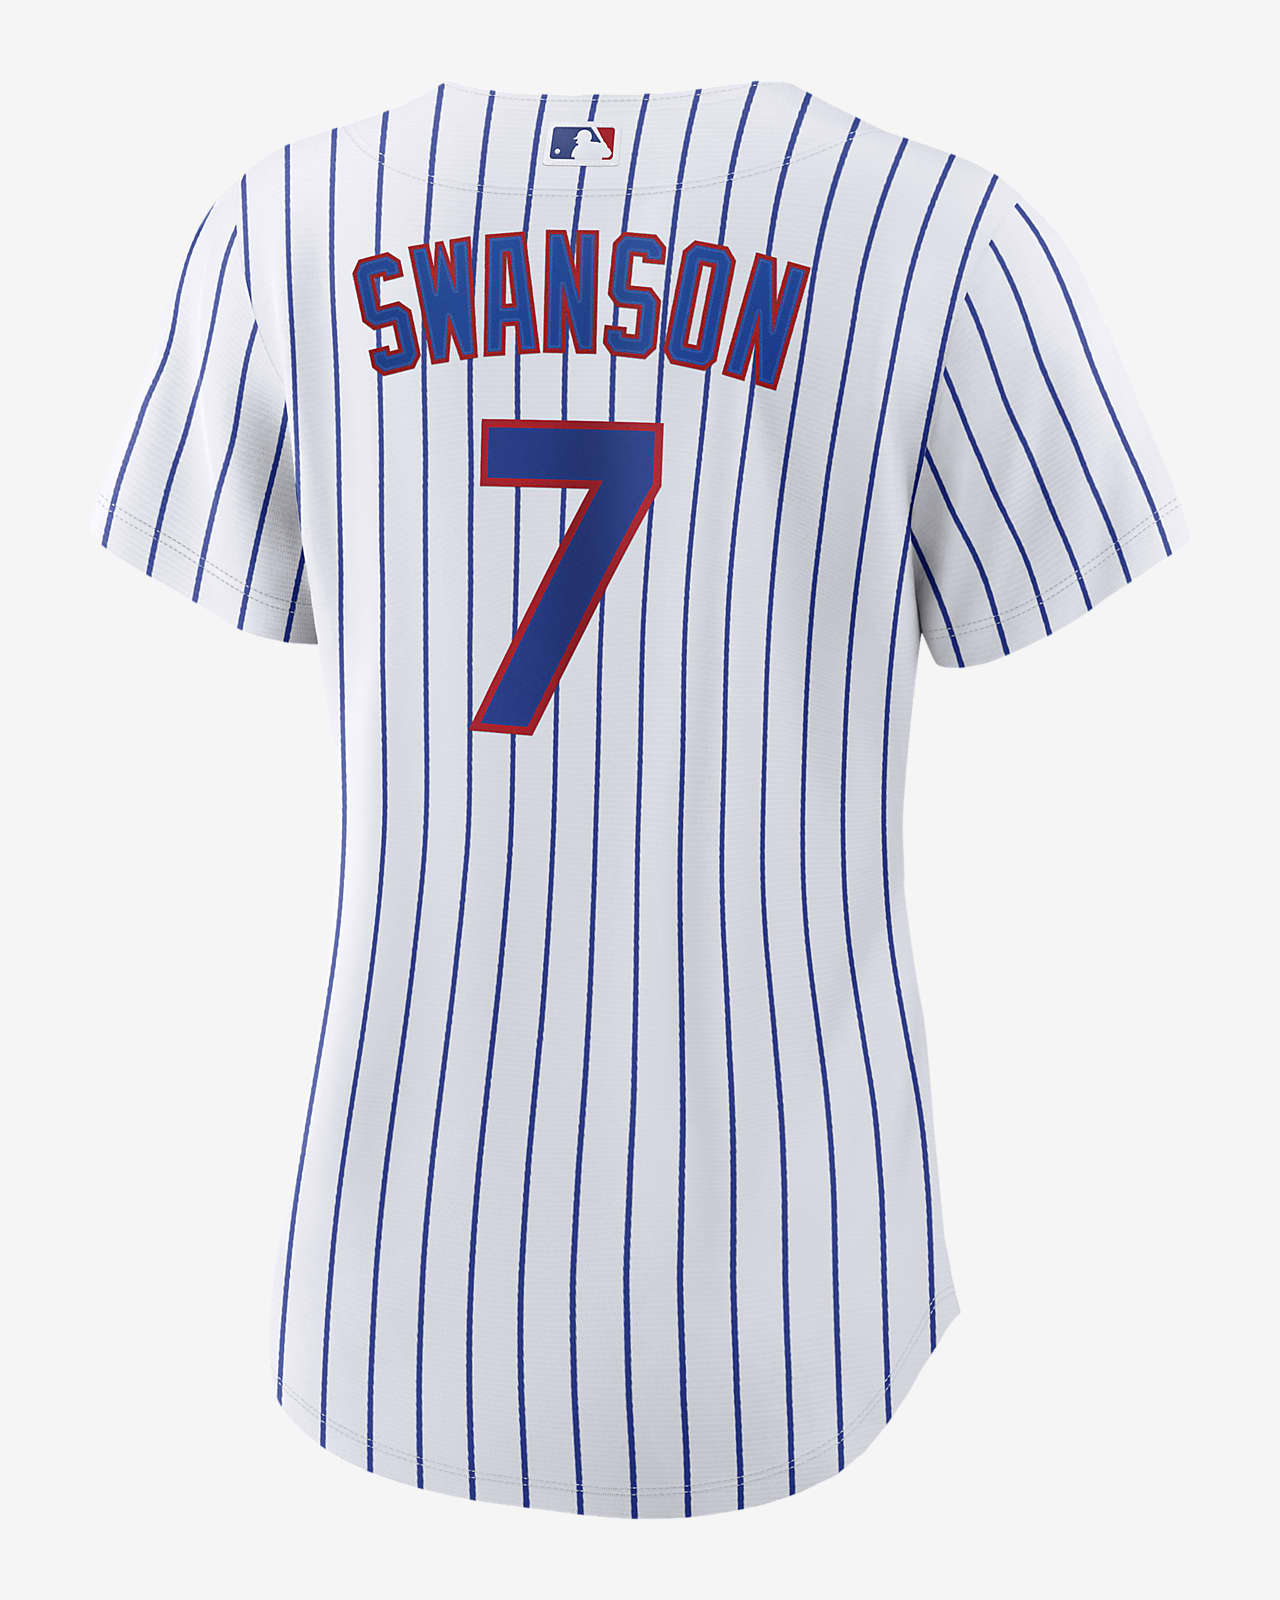 dansby swanson cubs jerseys